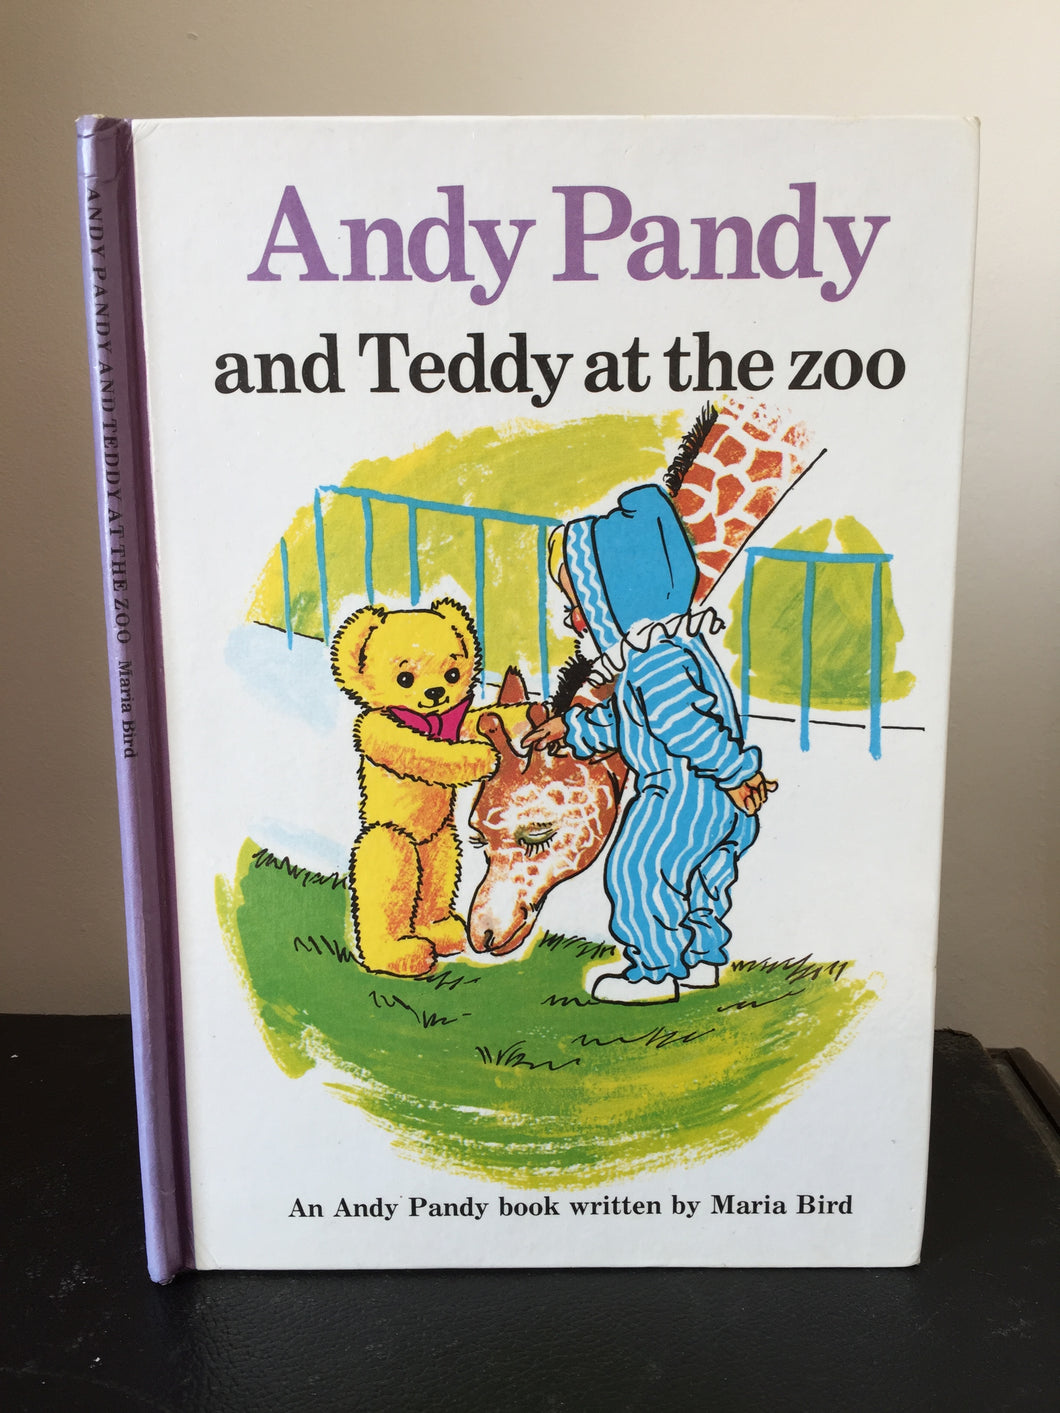 Andy Pandy and Teddy at the Zoo